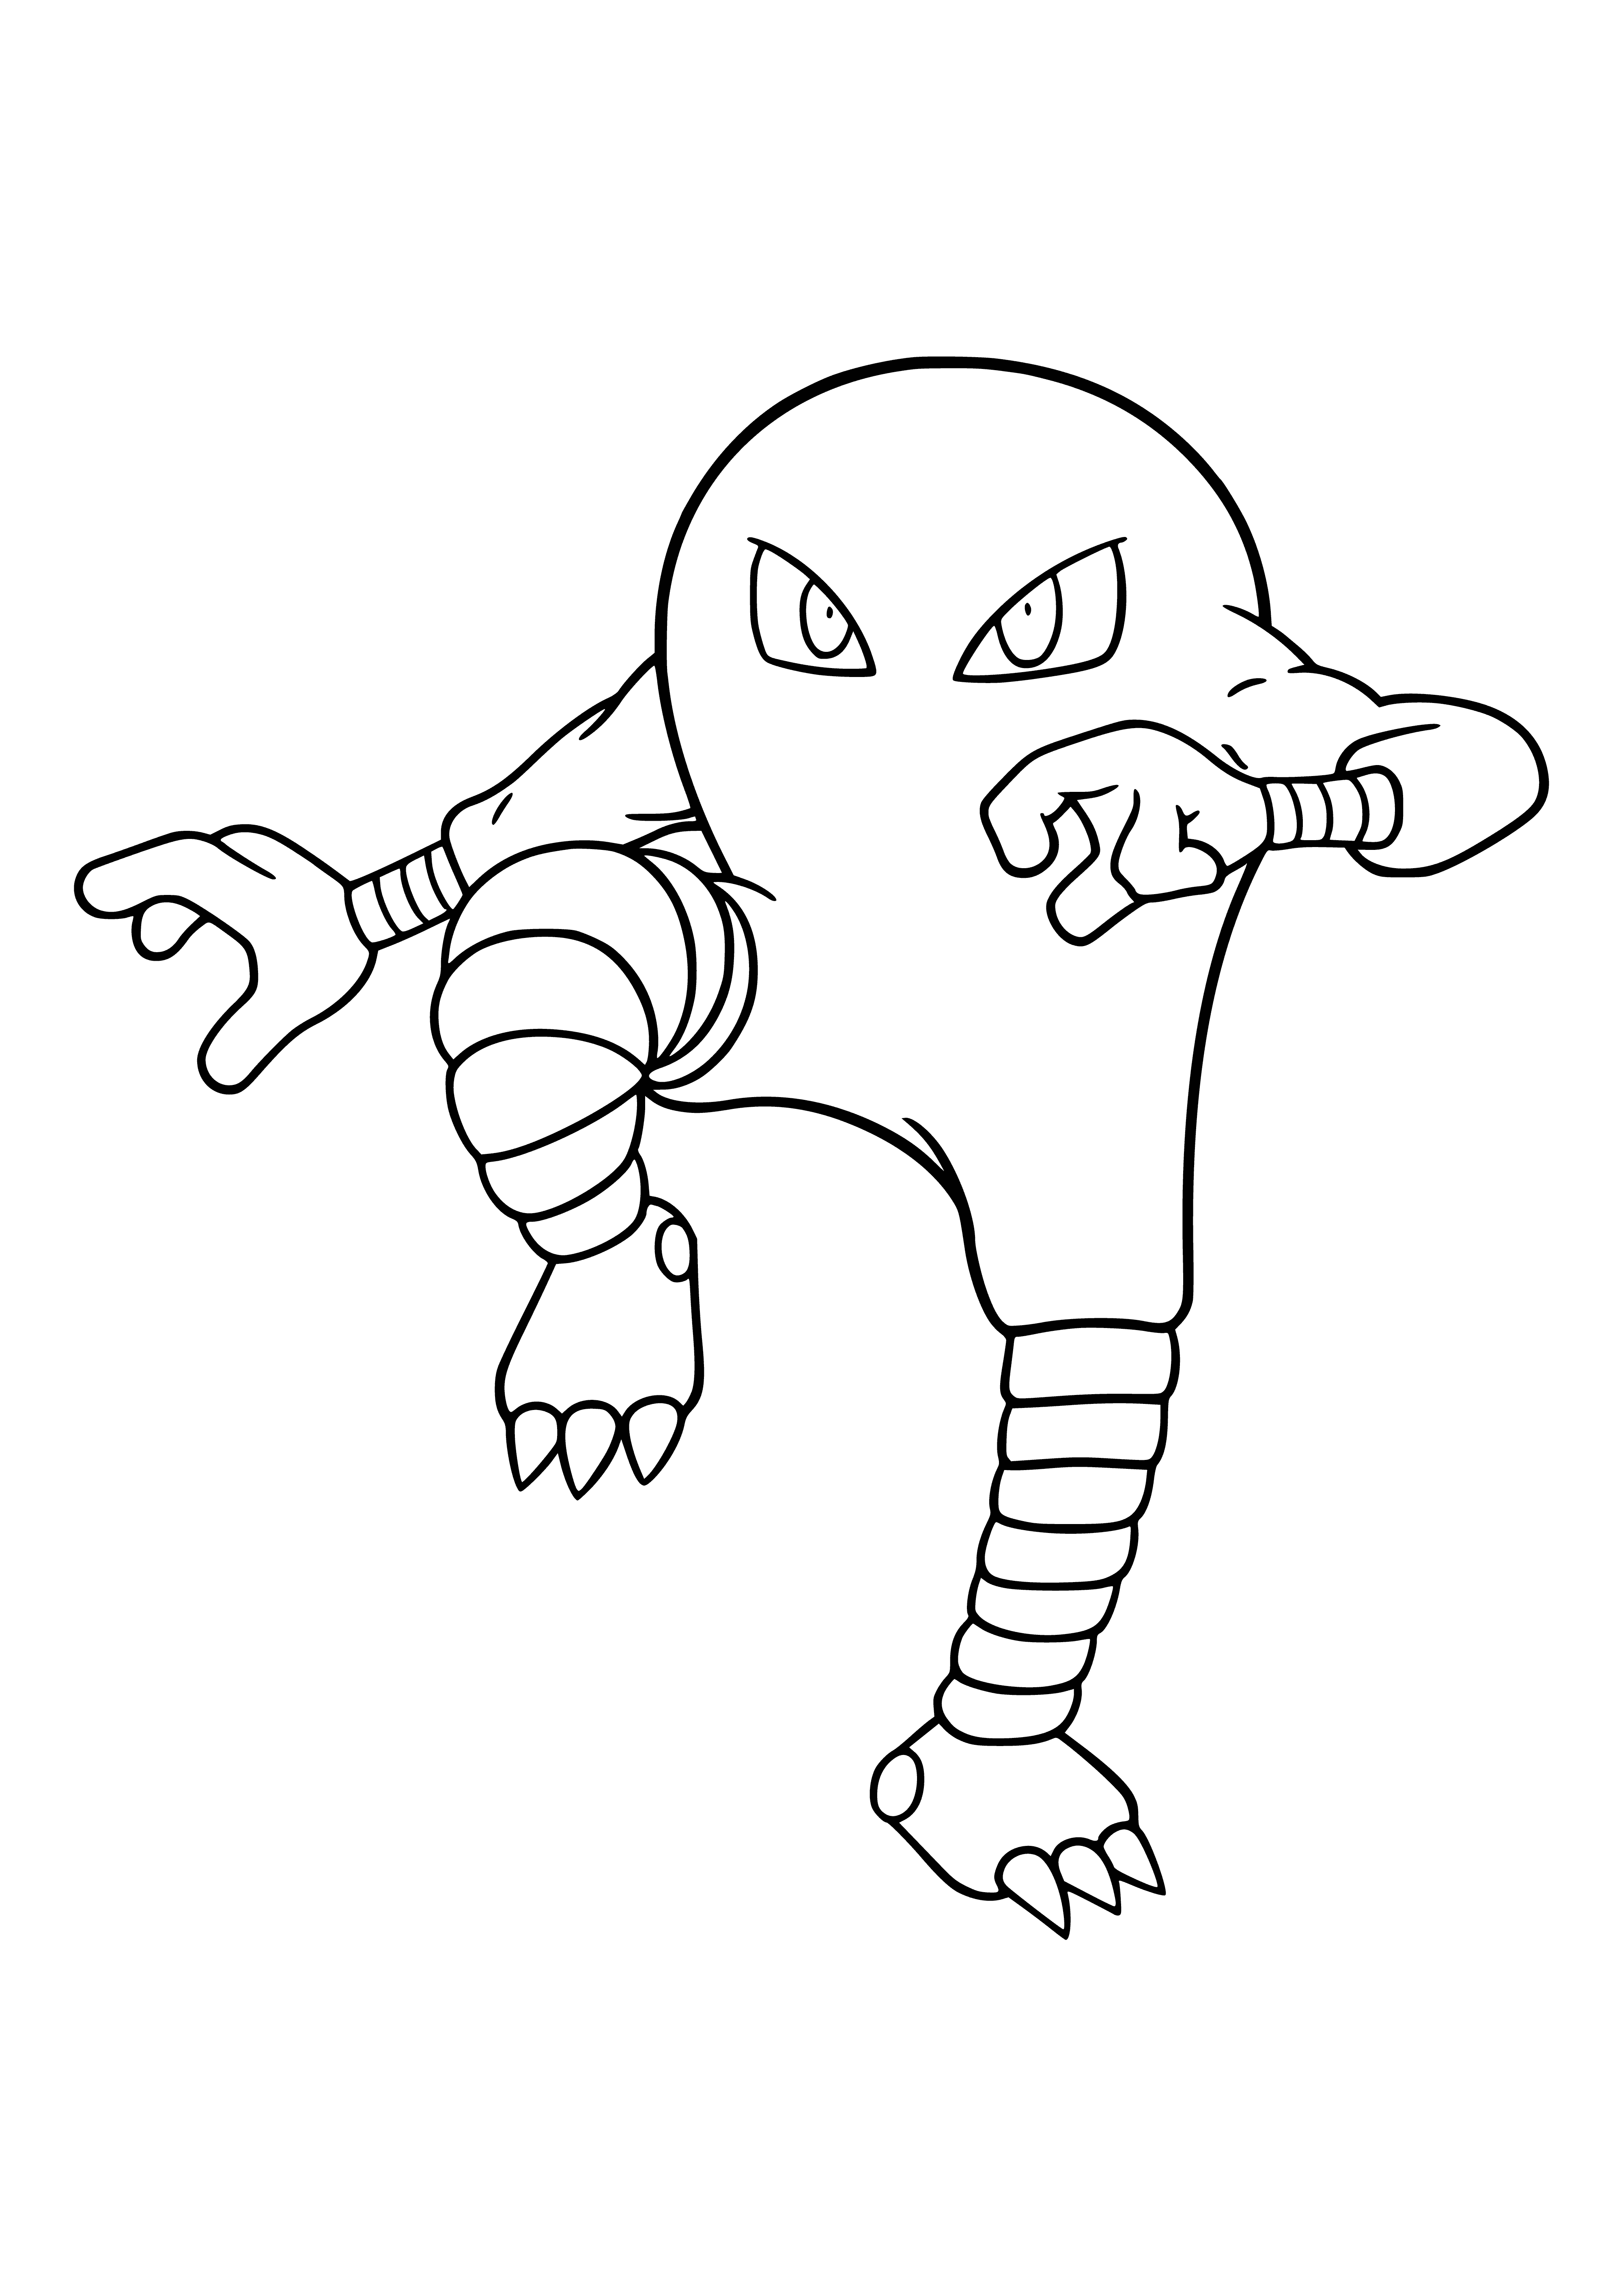 coloring page: #140char

A Pokemon with long, powerful legs, no arms, a round head, black eyes, a small black nose, sharp teeth and a long tail with a black tip. Smiling!